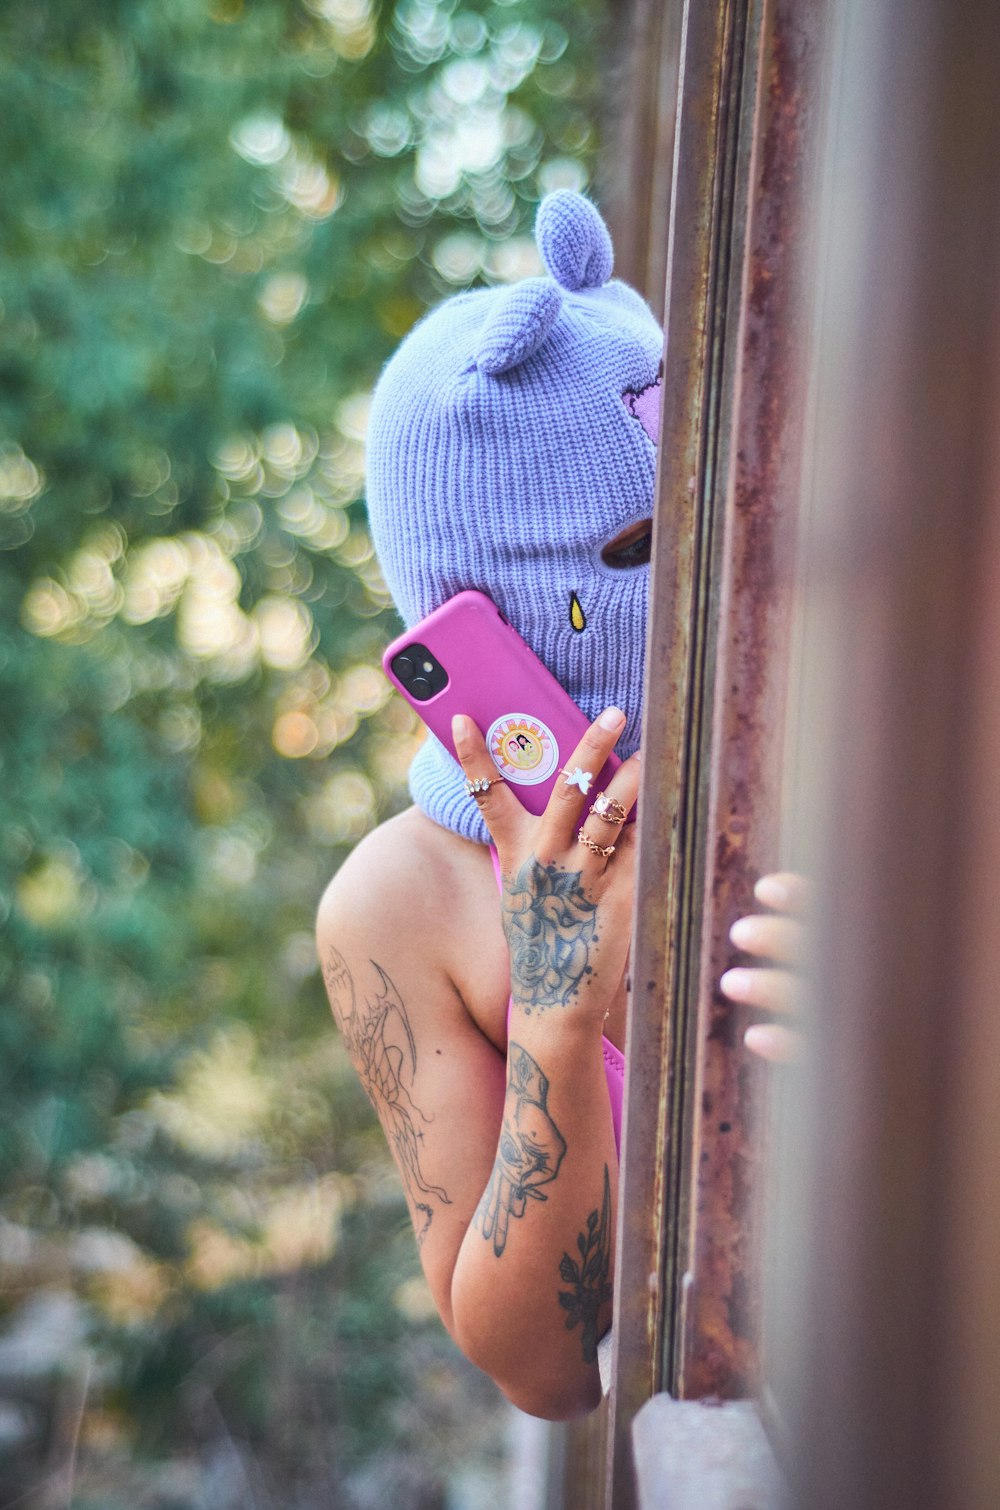 a person in a garment holding a cell phone